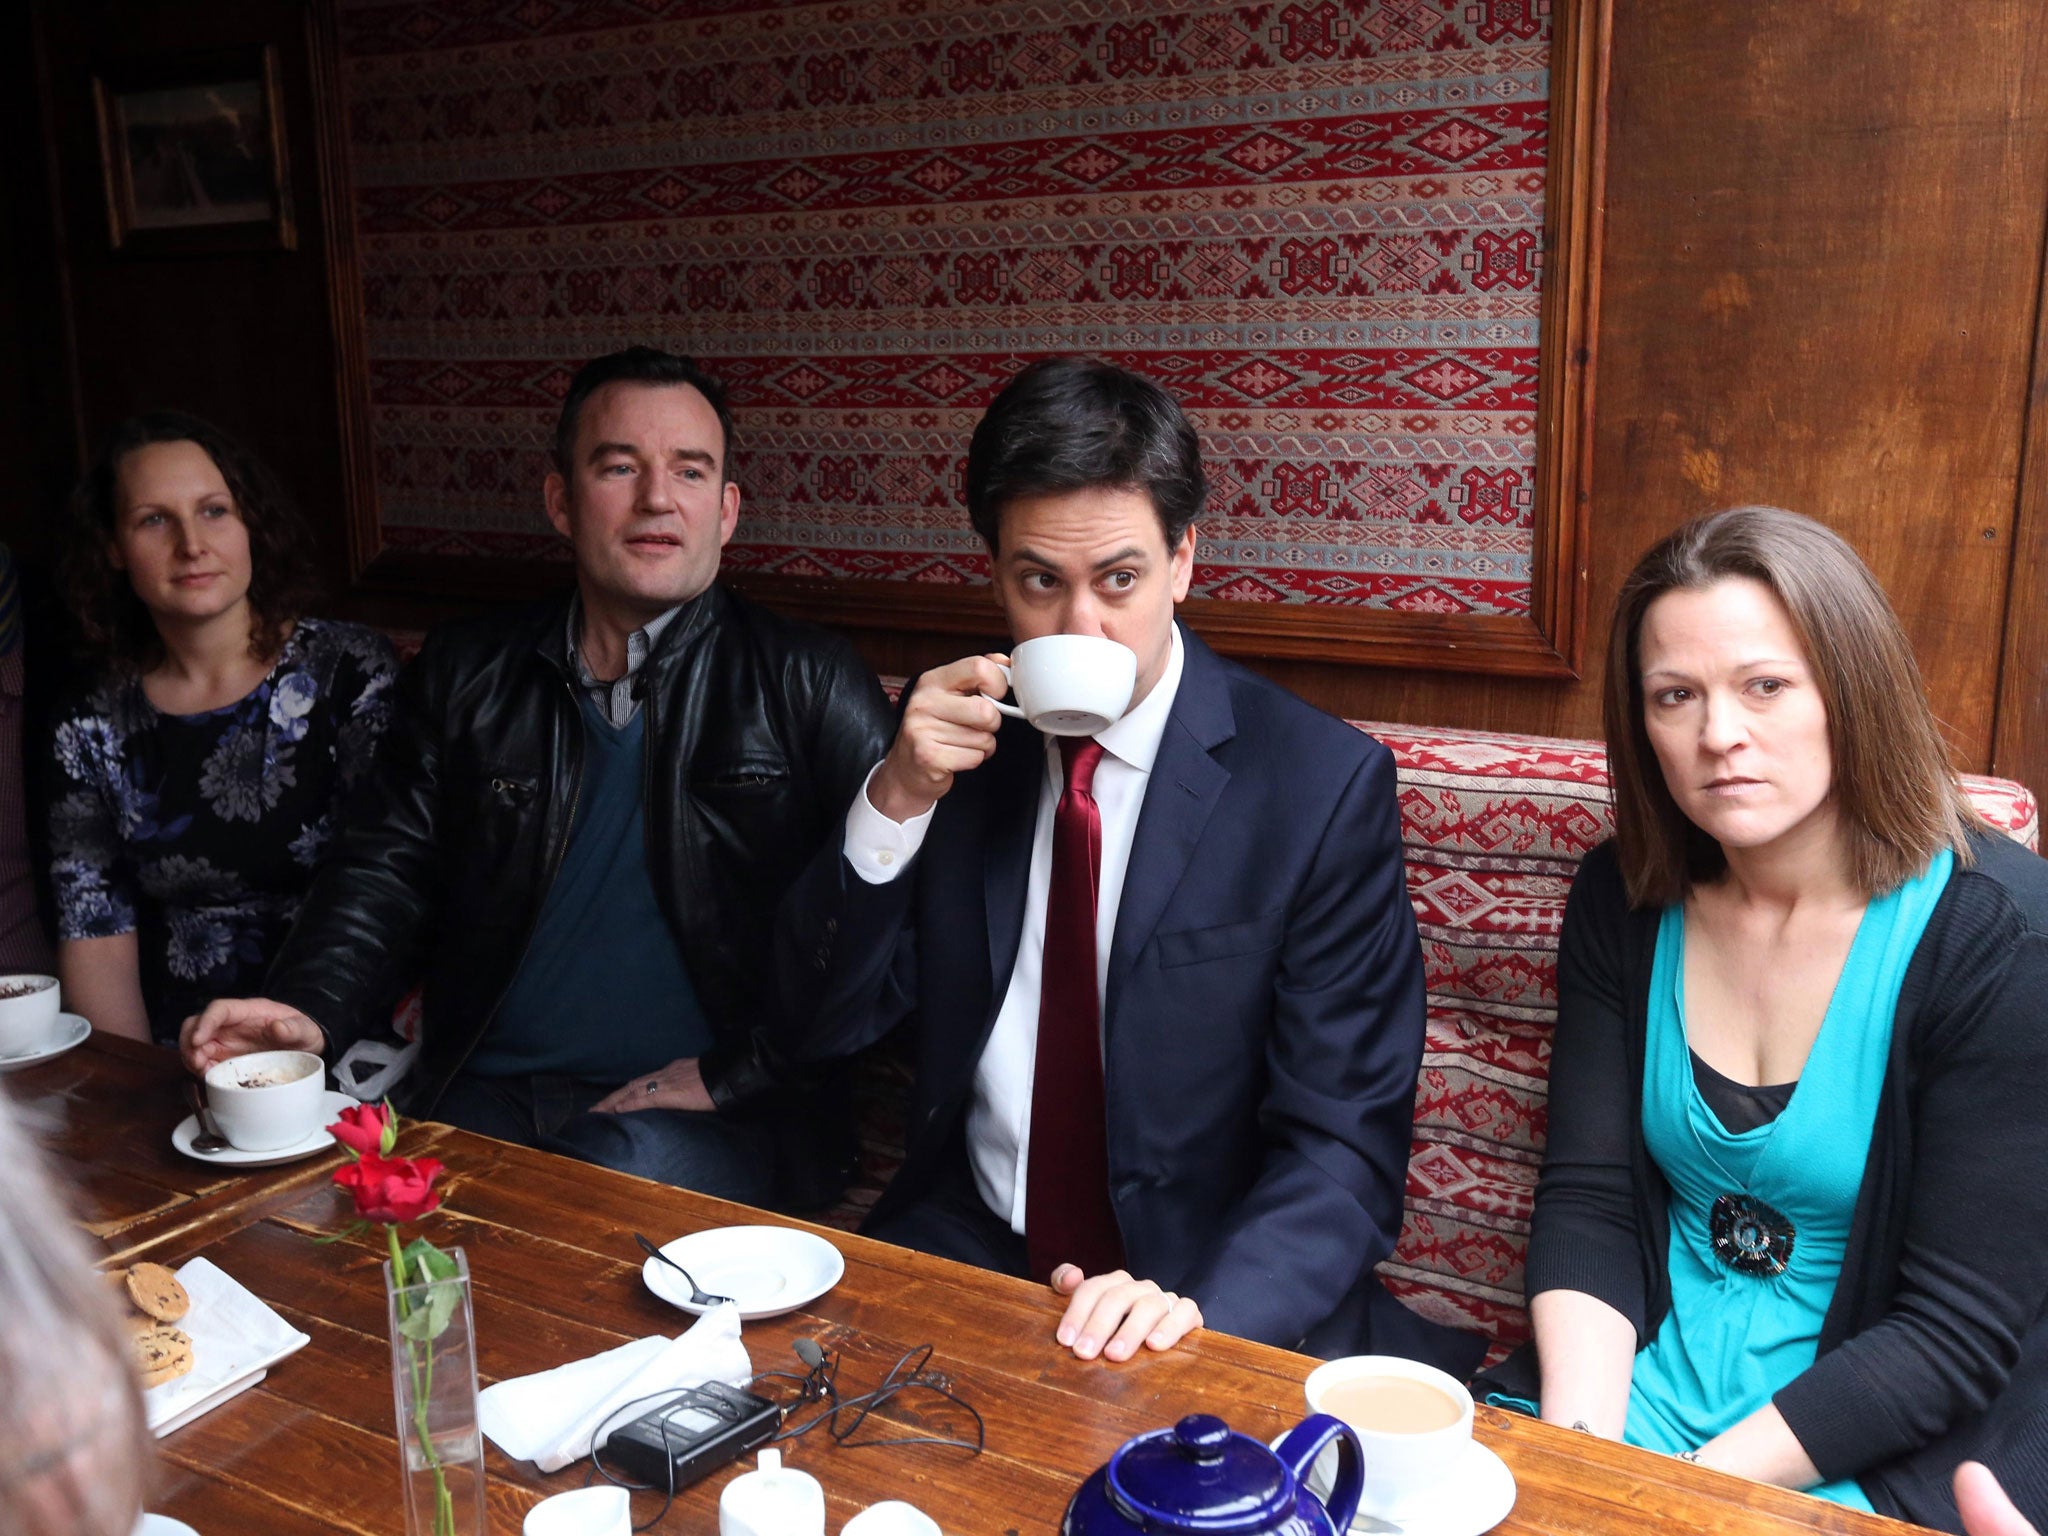 Meet the voters: Ed Miliband talks to former Liberal Democrat supporters in Eastleigh